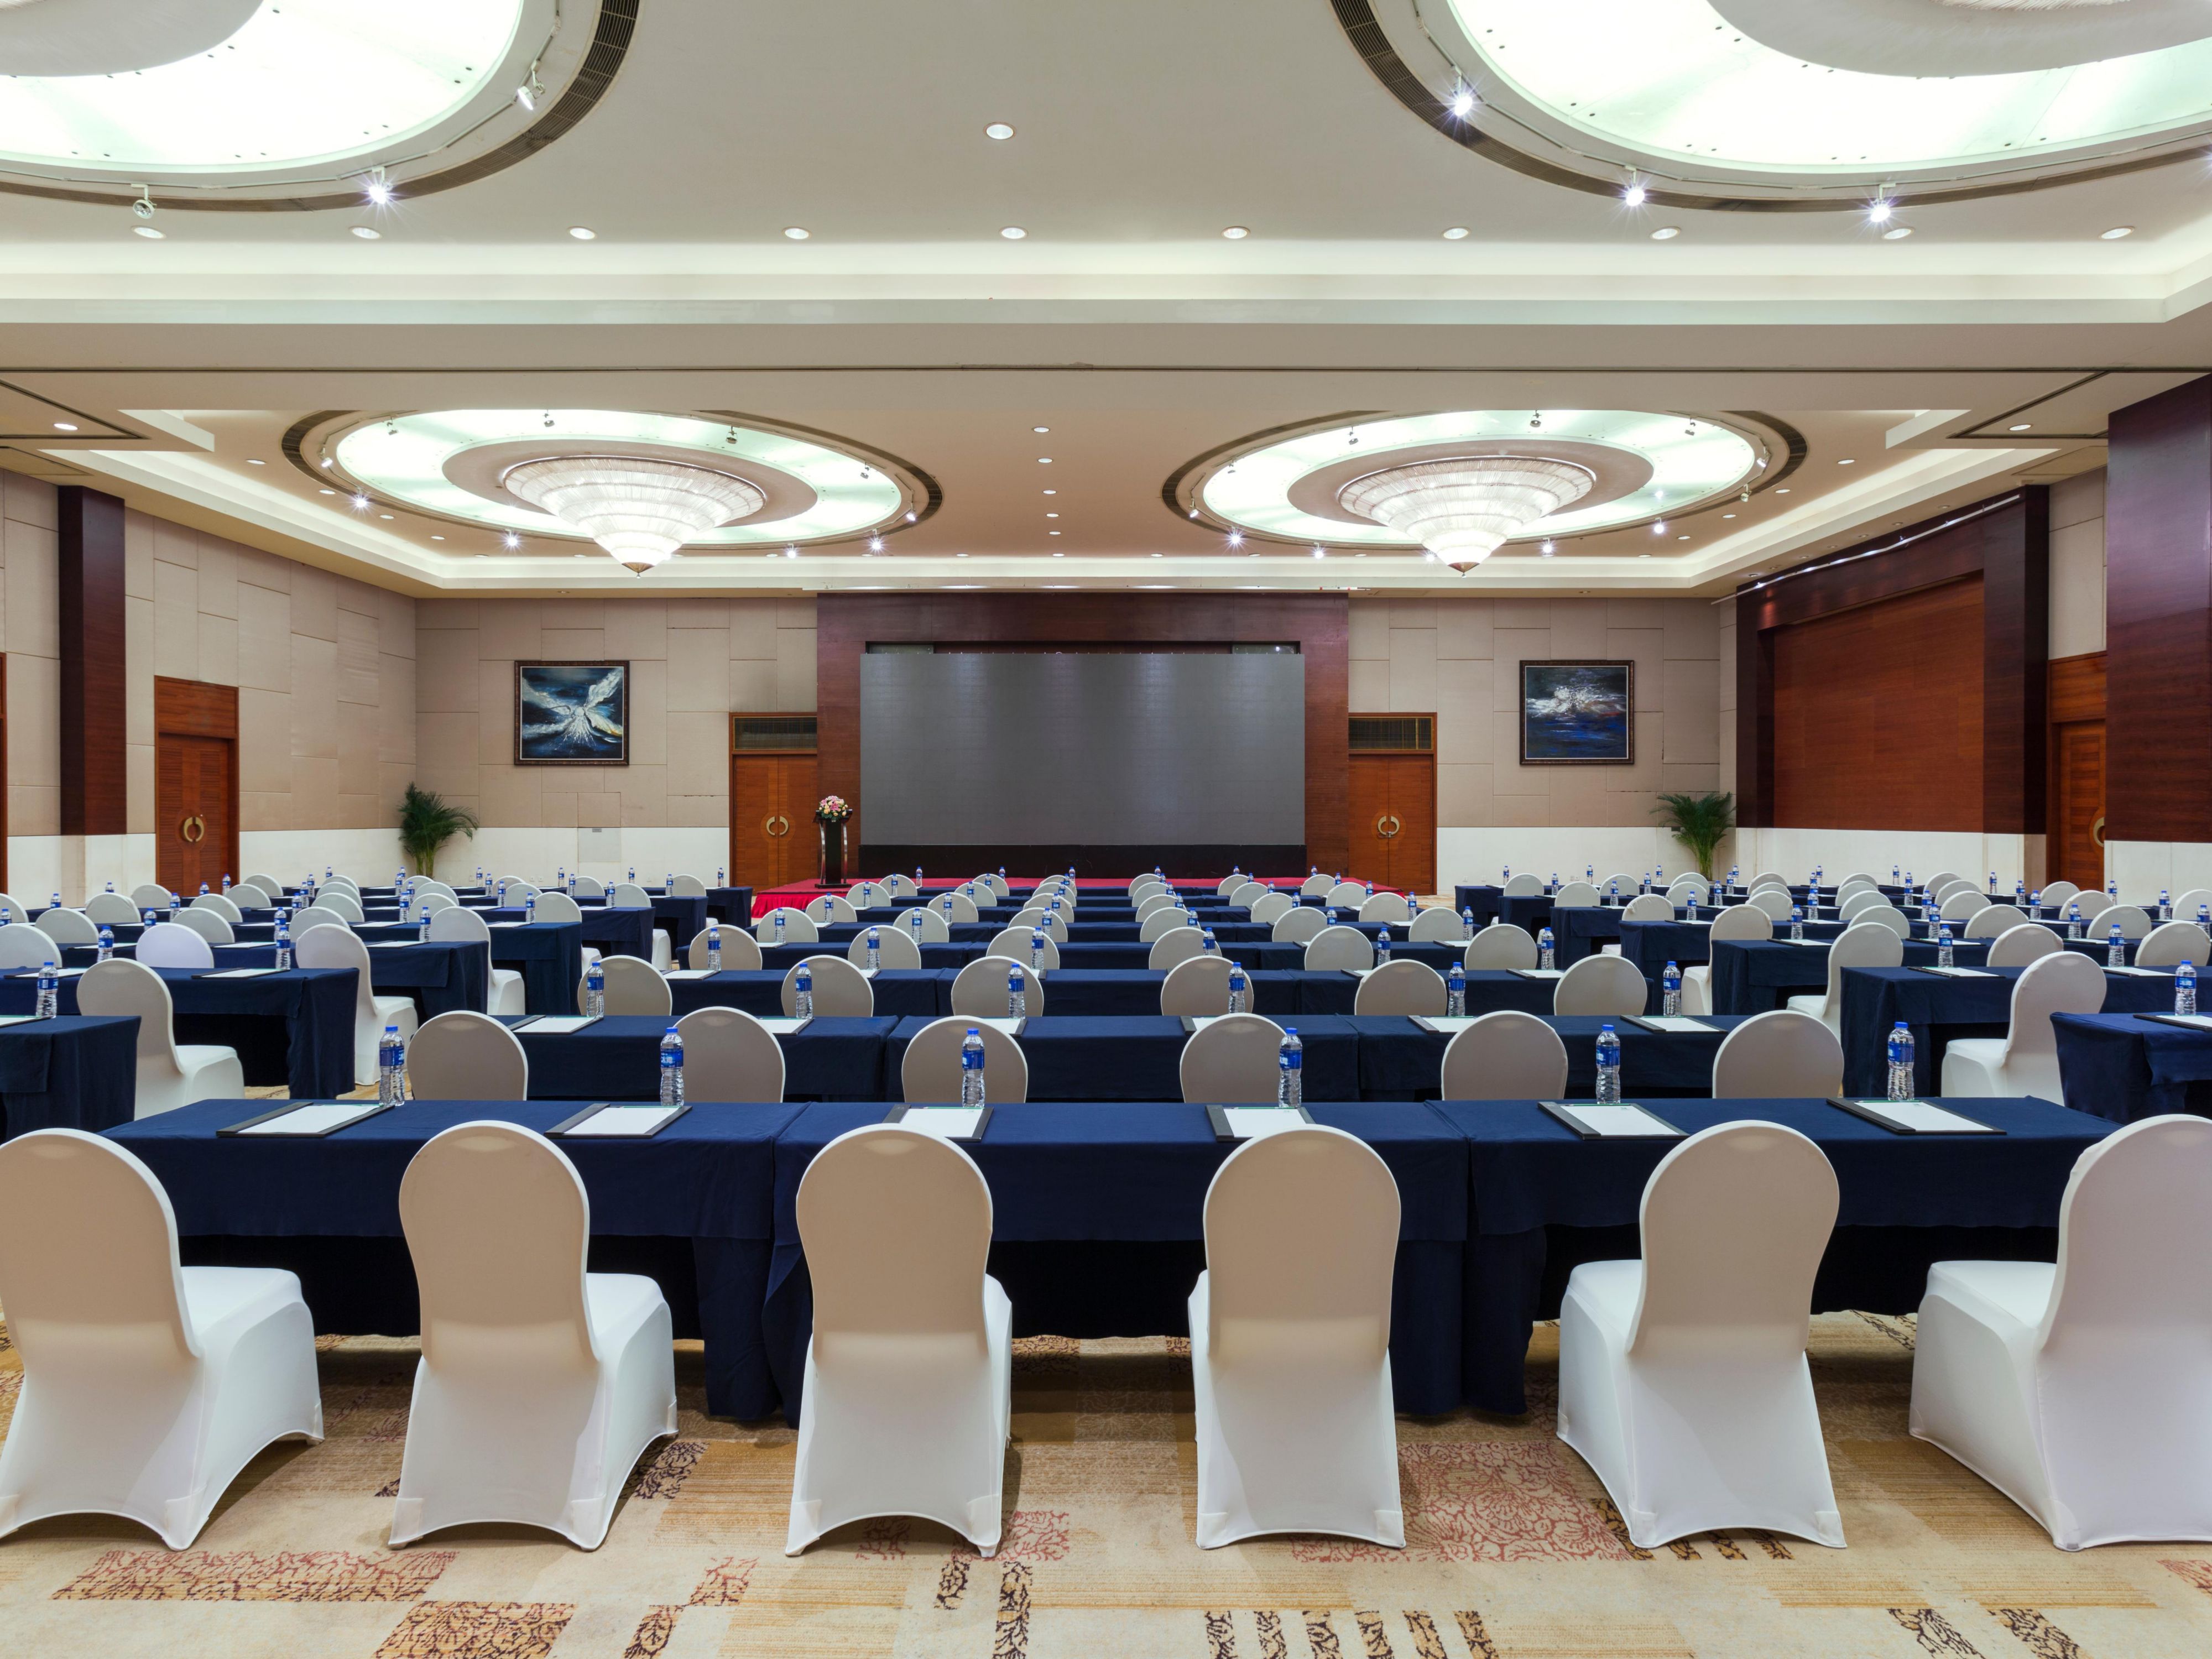 One 640 square meter pillar-free Grand Ballroom and five multi-function meeting rooms, ranging from 60-120 square meters provide diversified services, a full range of facilities and equipment. The hotel is able to fully meet the needs of events in any size and is a great choice for conferences and banquets.